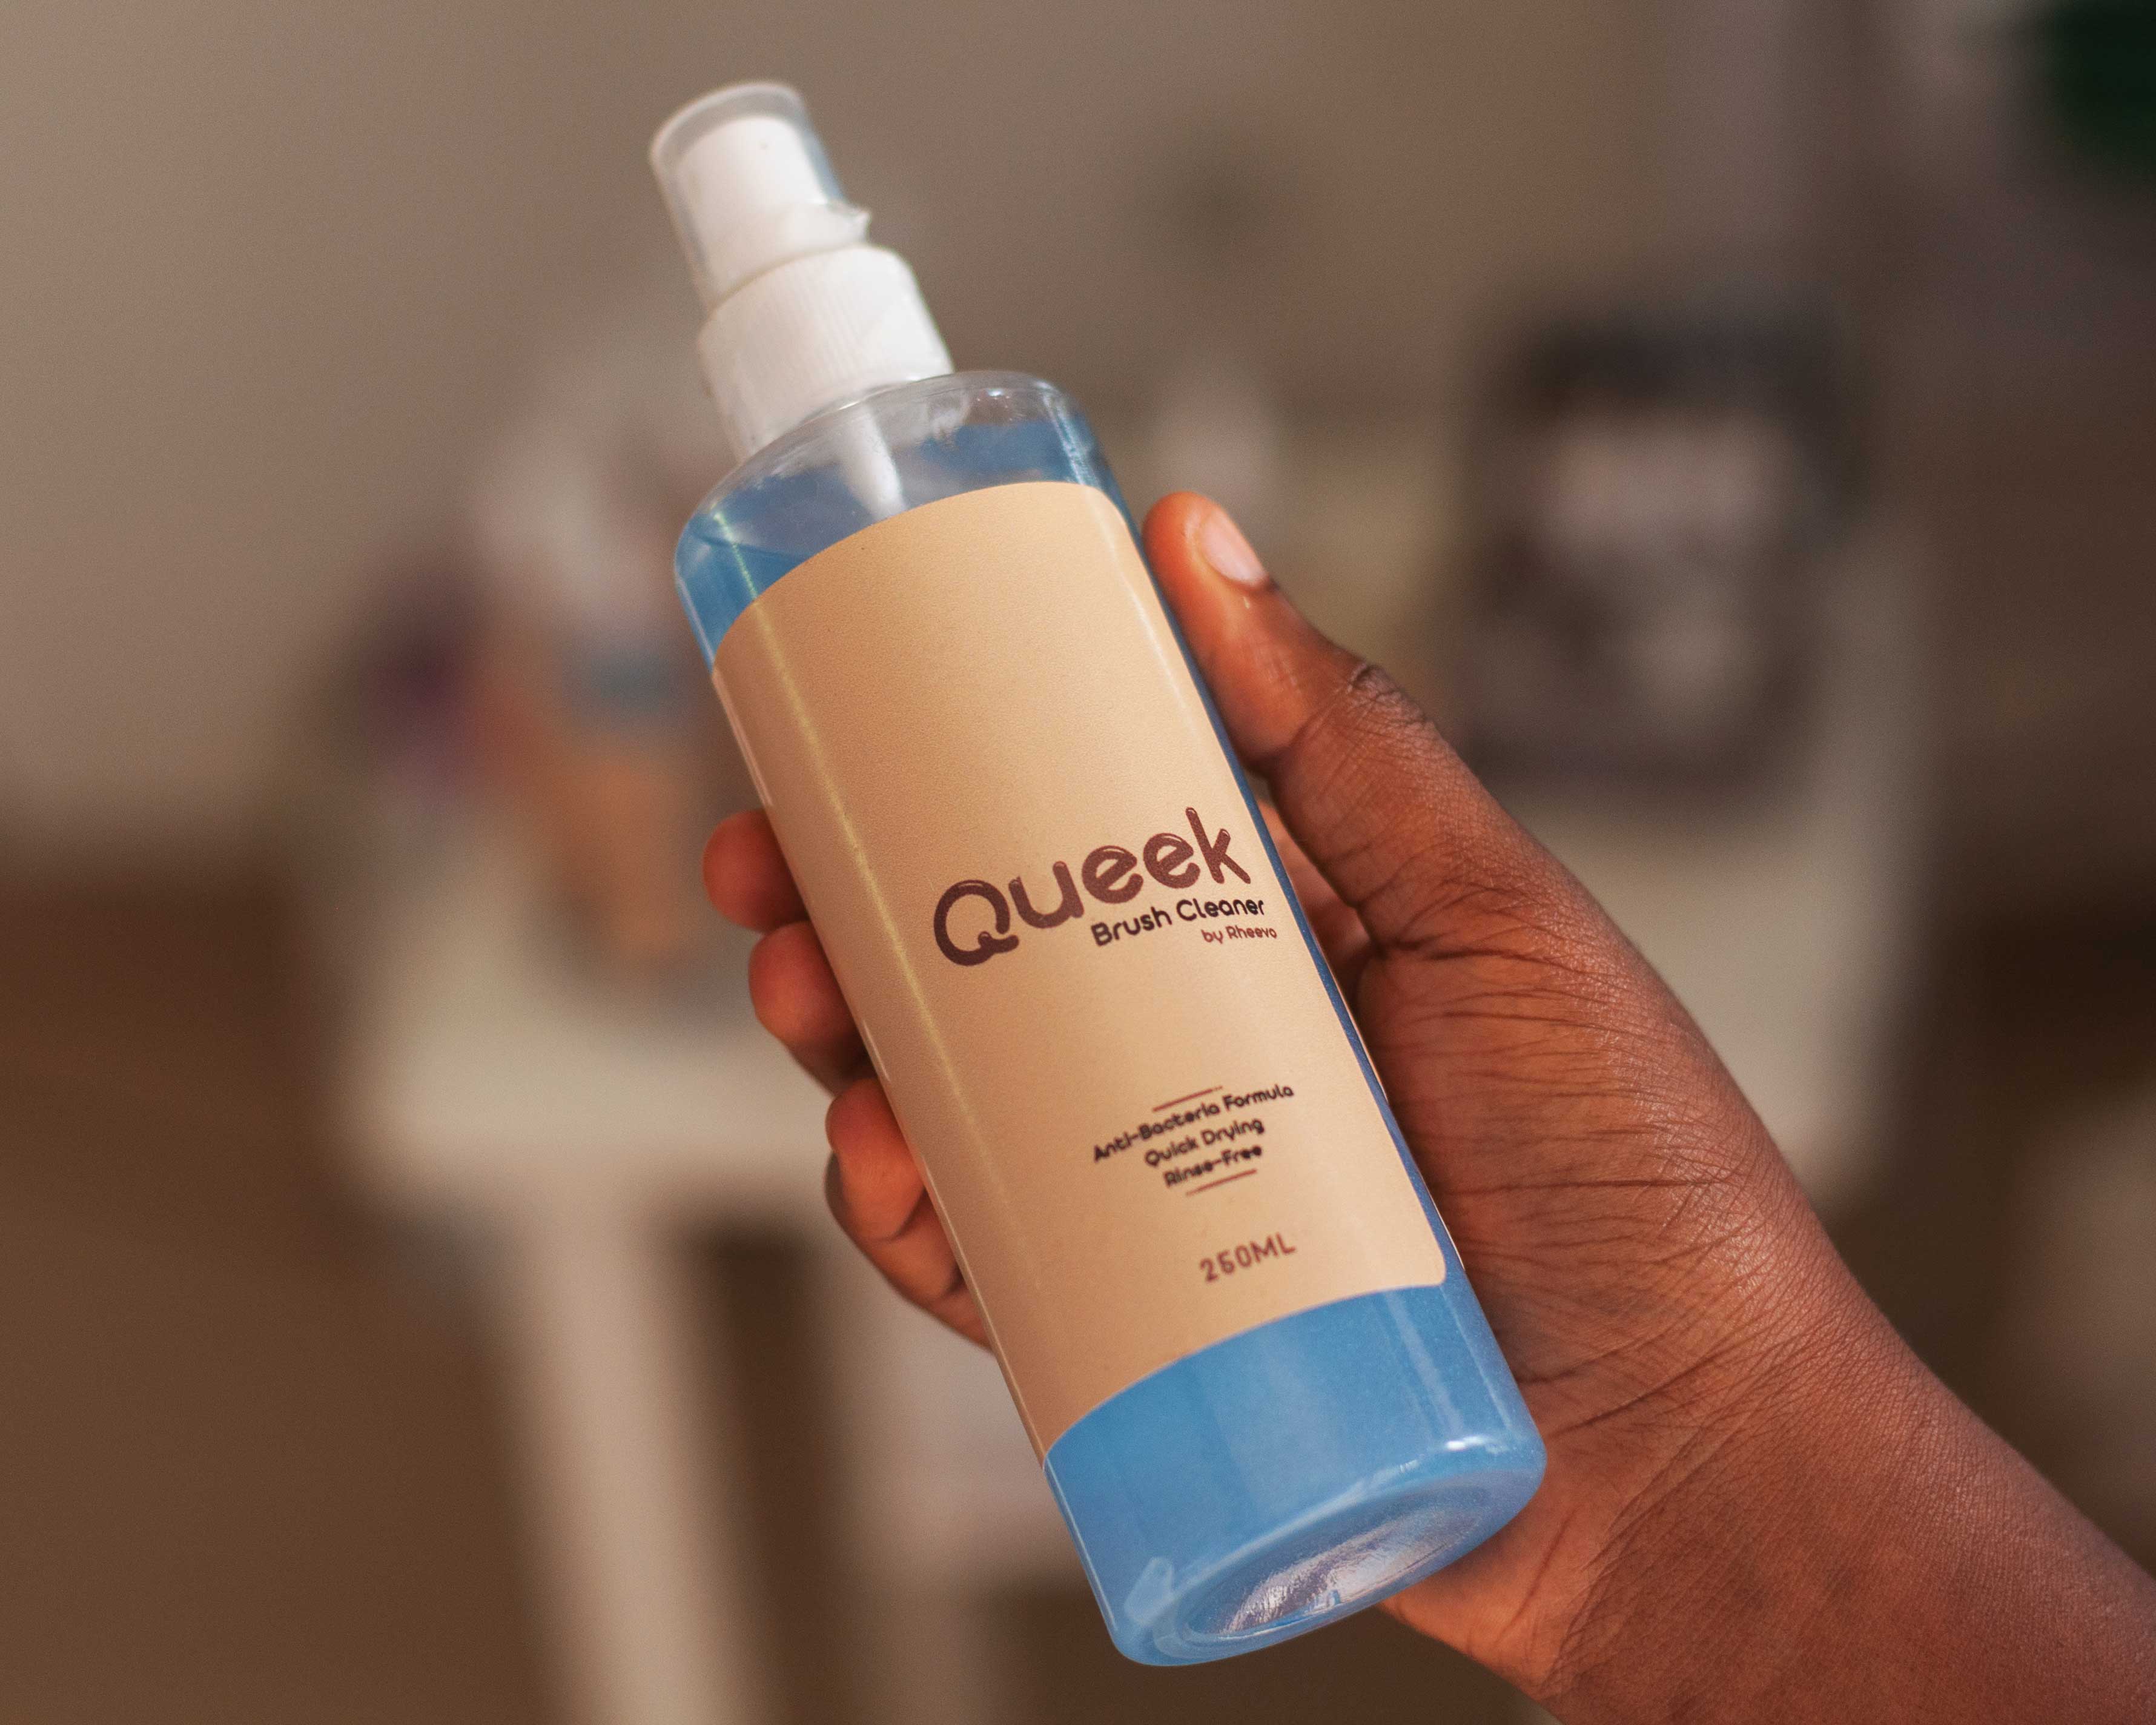 A picture of Queek. It is an instant makeup brush cleaner